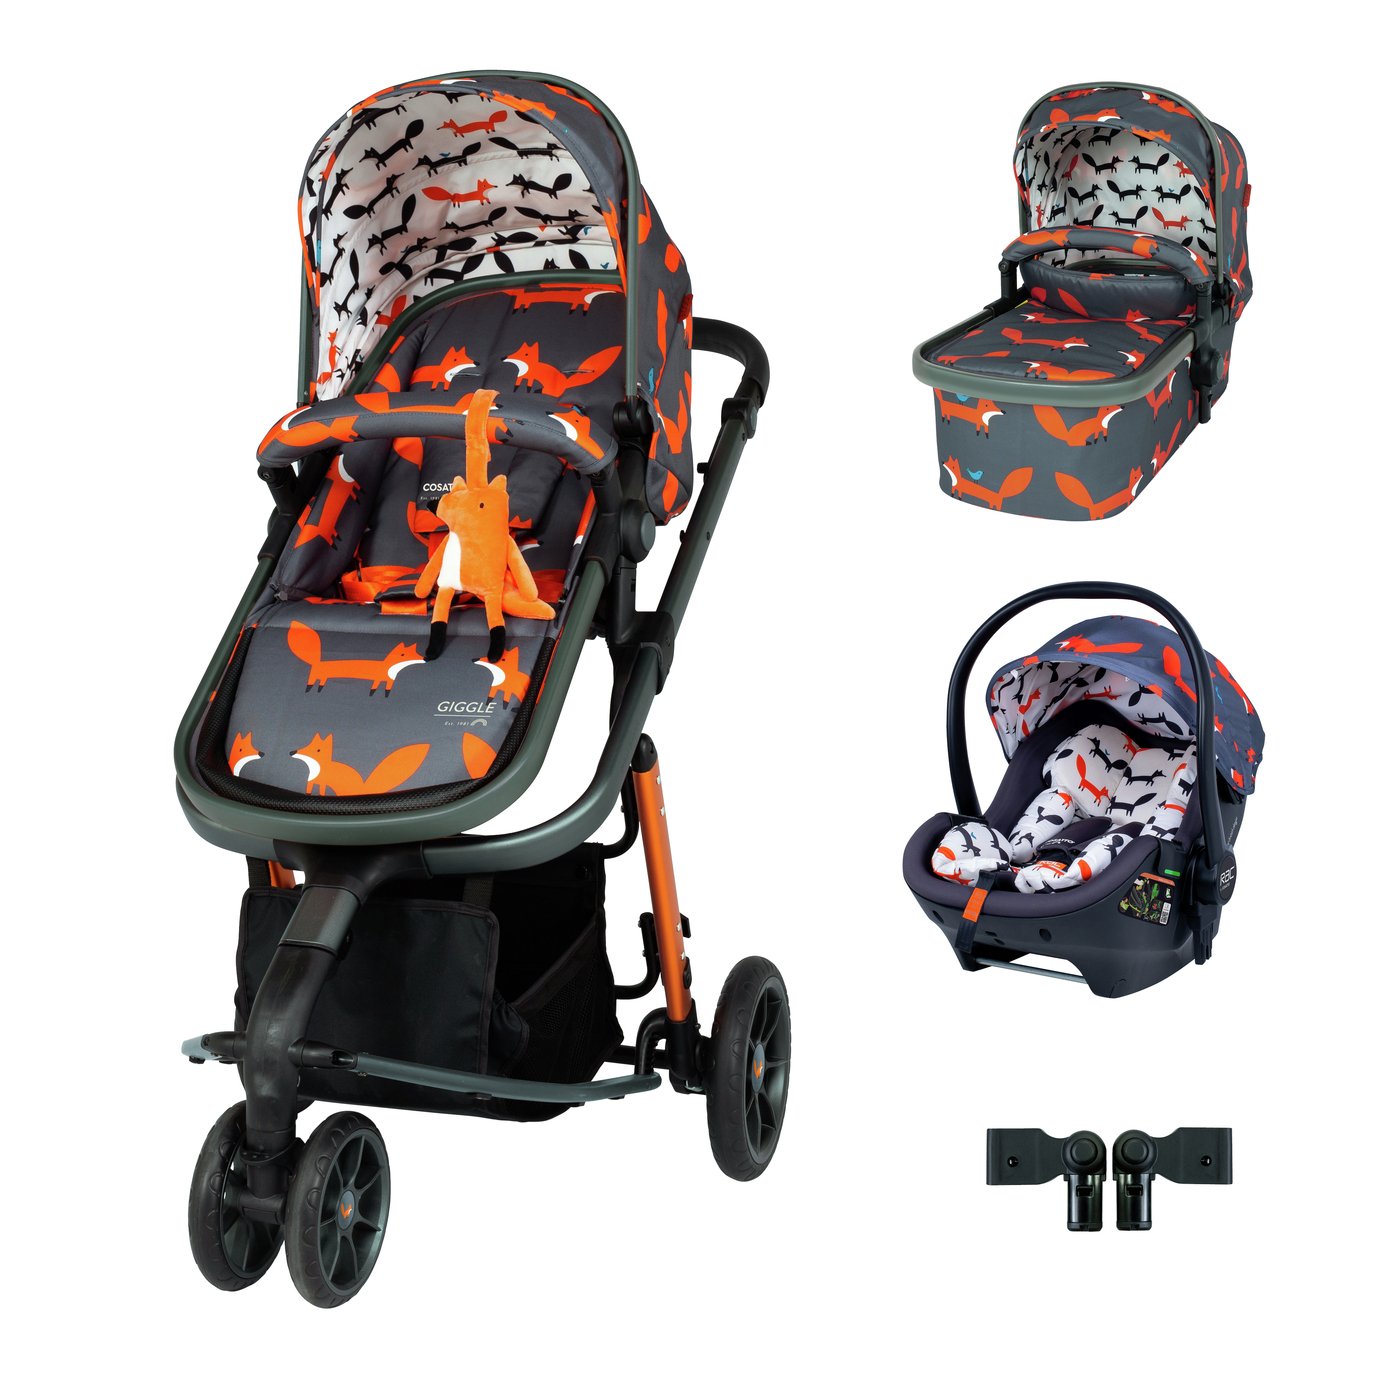 Cosatto Giggle 3 Premium Travel System Bundle Review